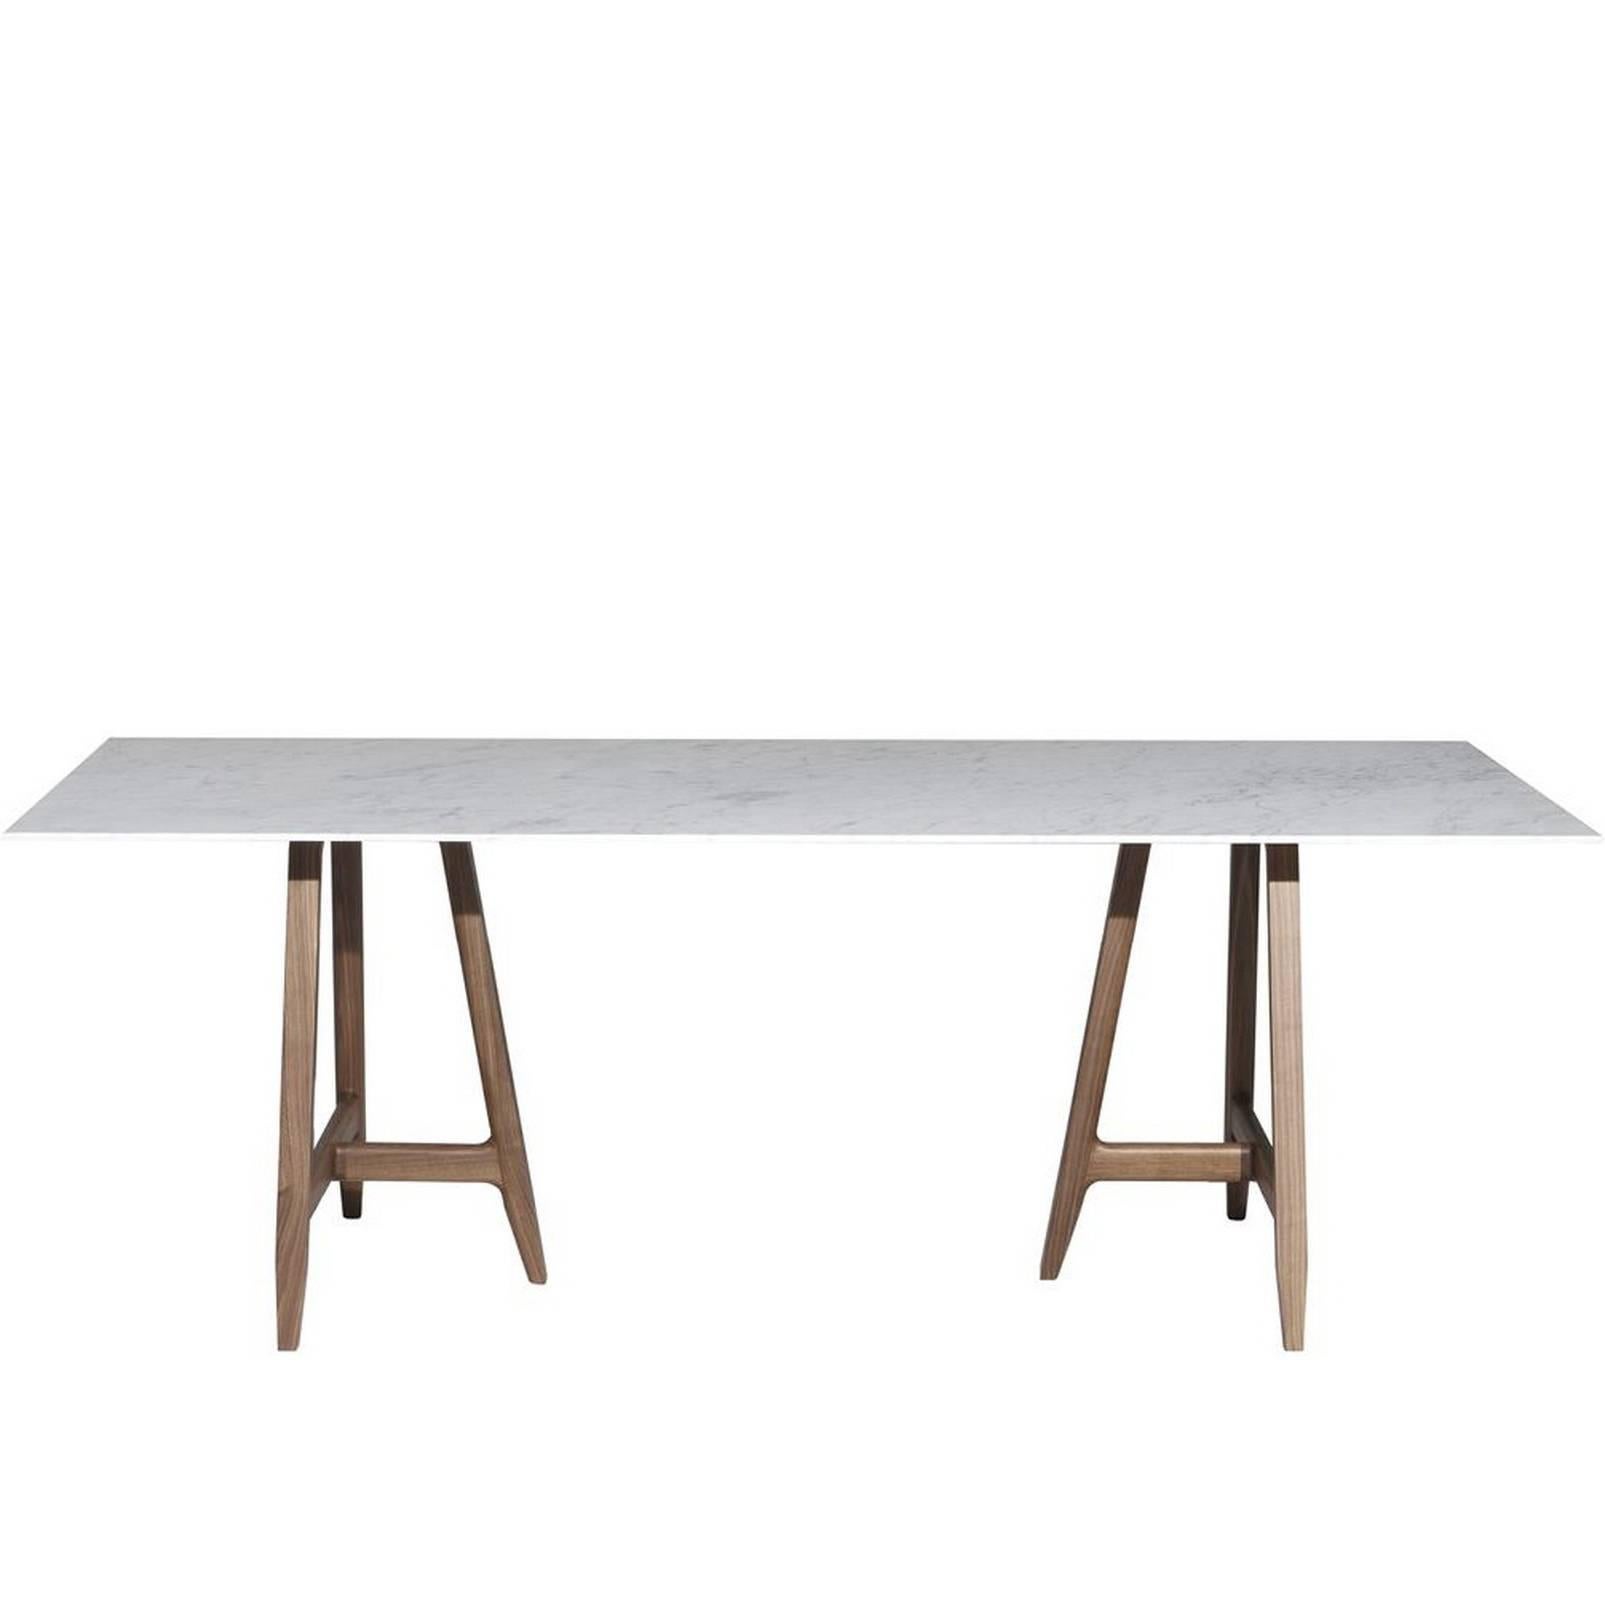 "Easel" White Carrara Marble Top Table Designed by L. and R. Palomba for Driade For Sale